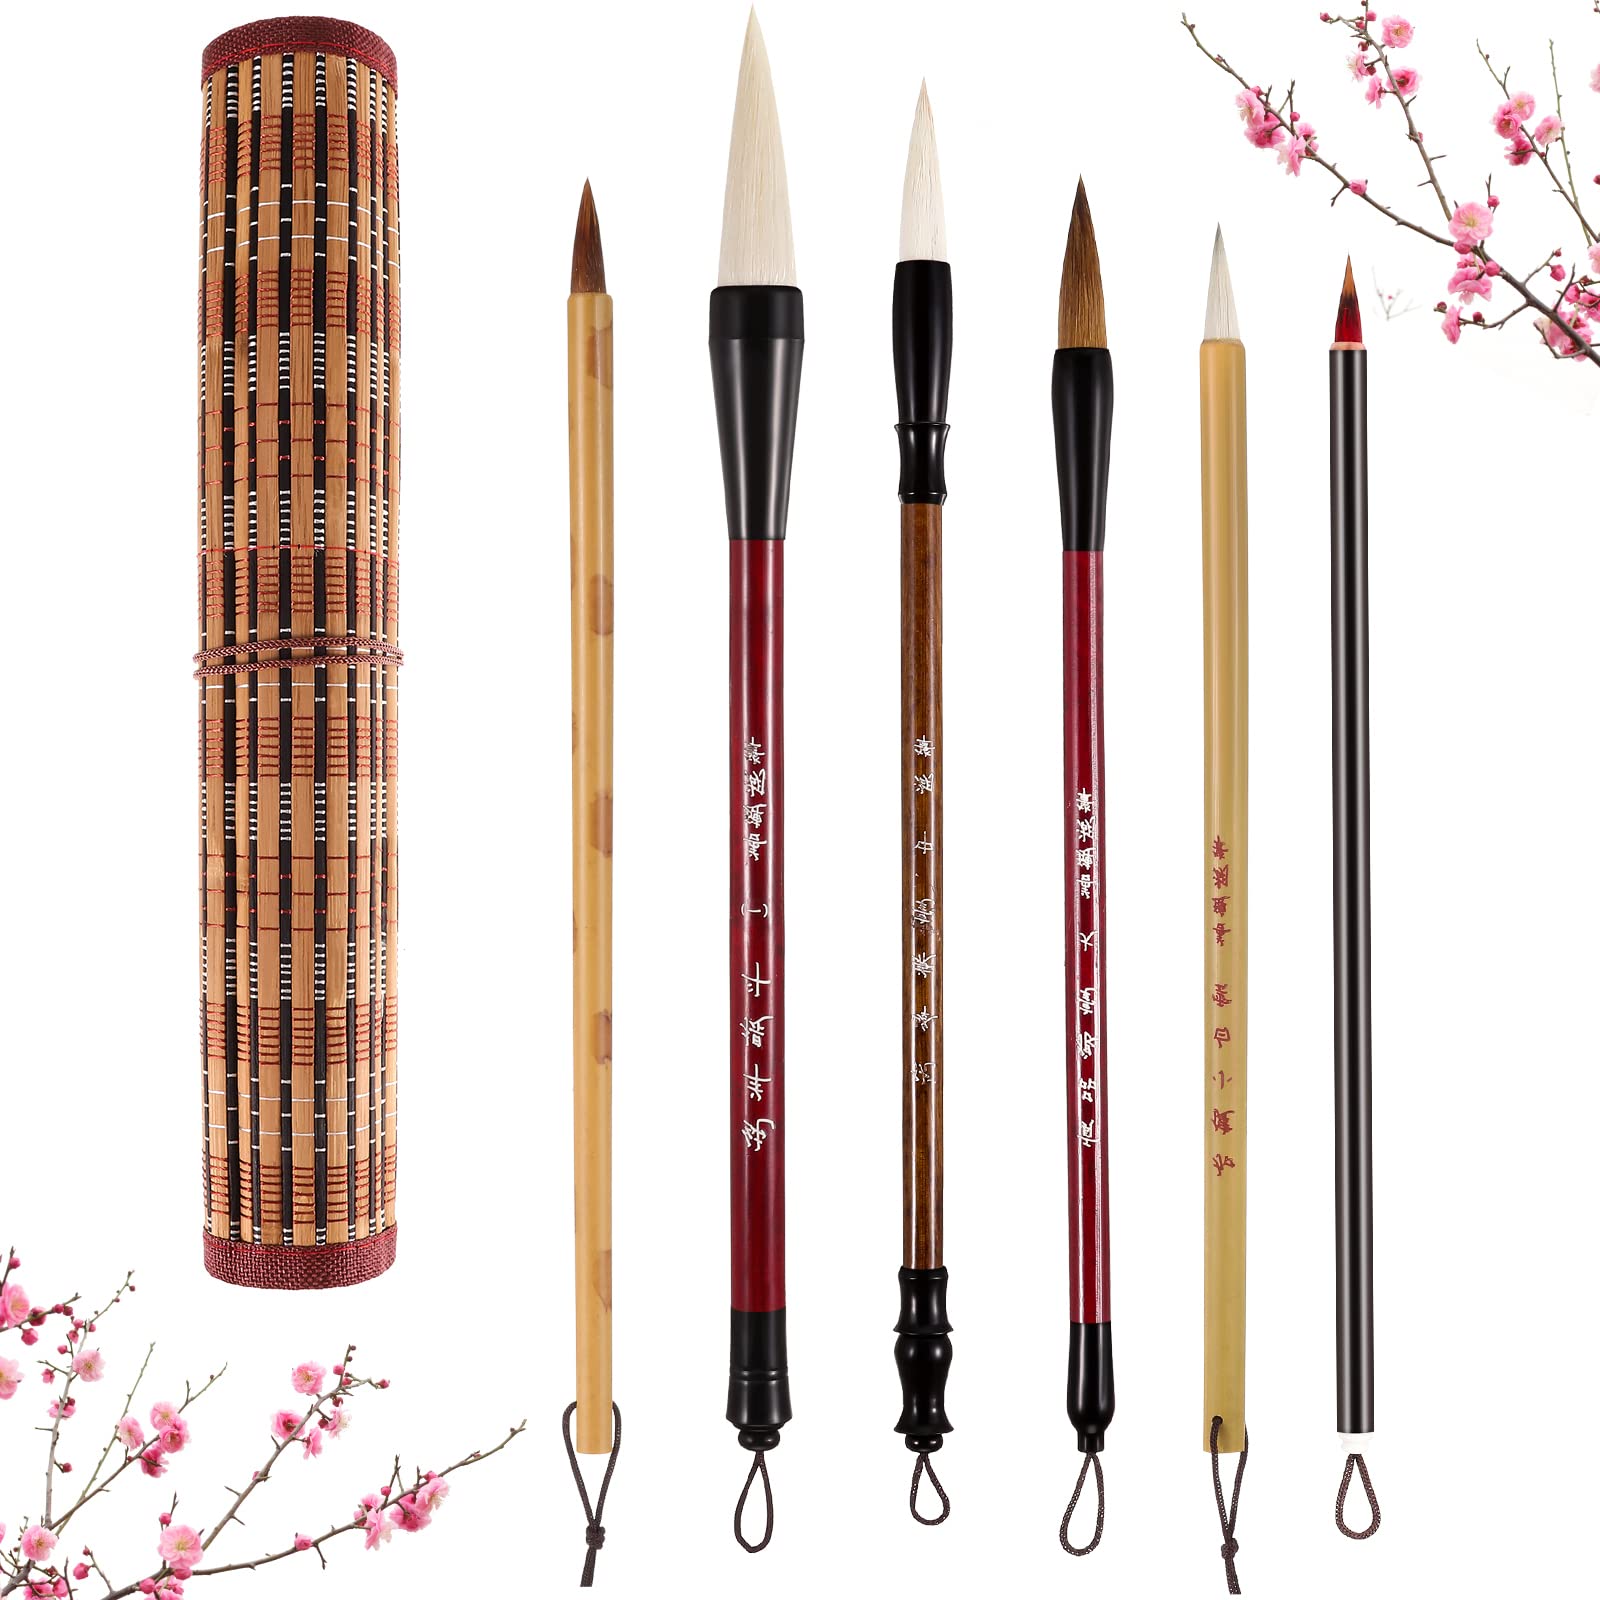  12 Pieces Chinese Calligraphy Brushes Painting Writing Brushes  Watercolor Brushes Set Kanji Japanese Sumi Painting Drawing Brushes Kanji  Art Brushes with Roll-up Brush Holder : Arts, Crafts & Sewing